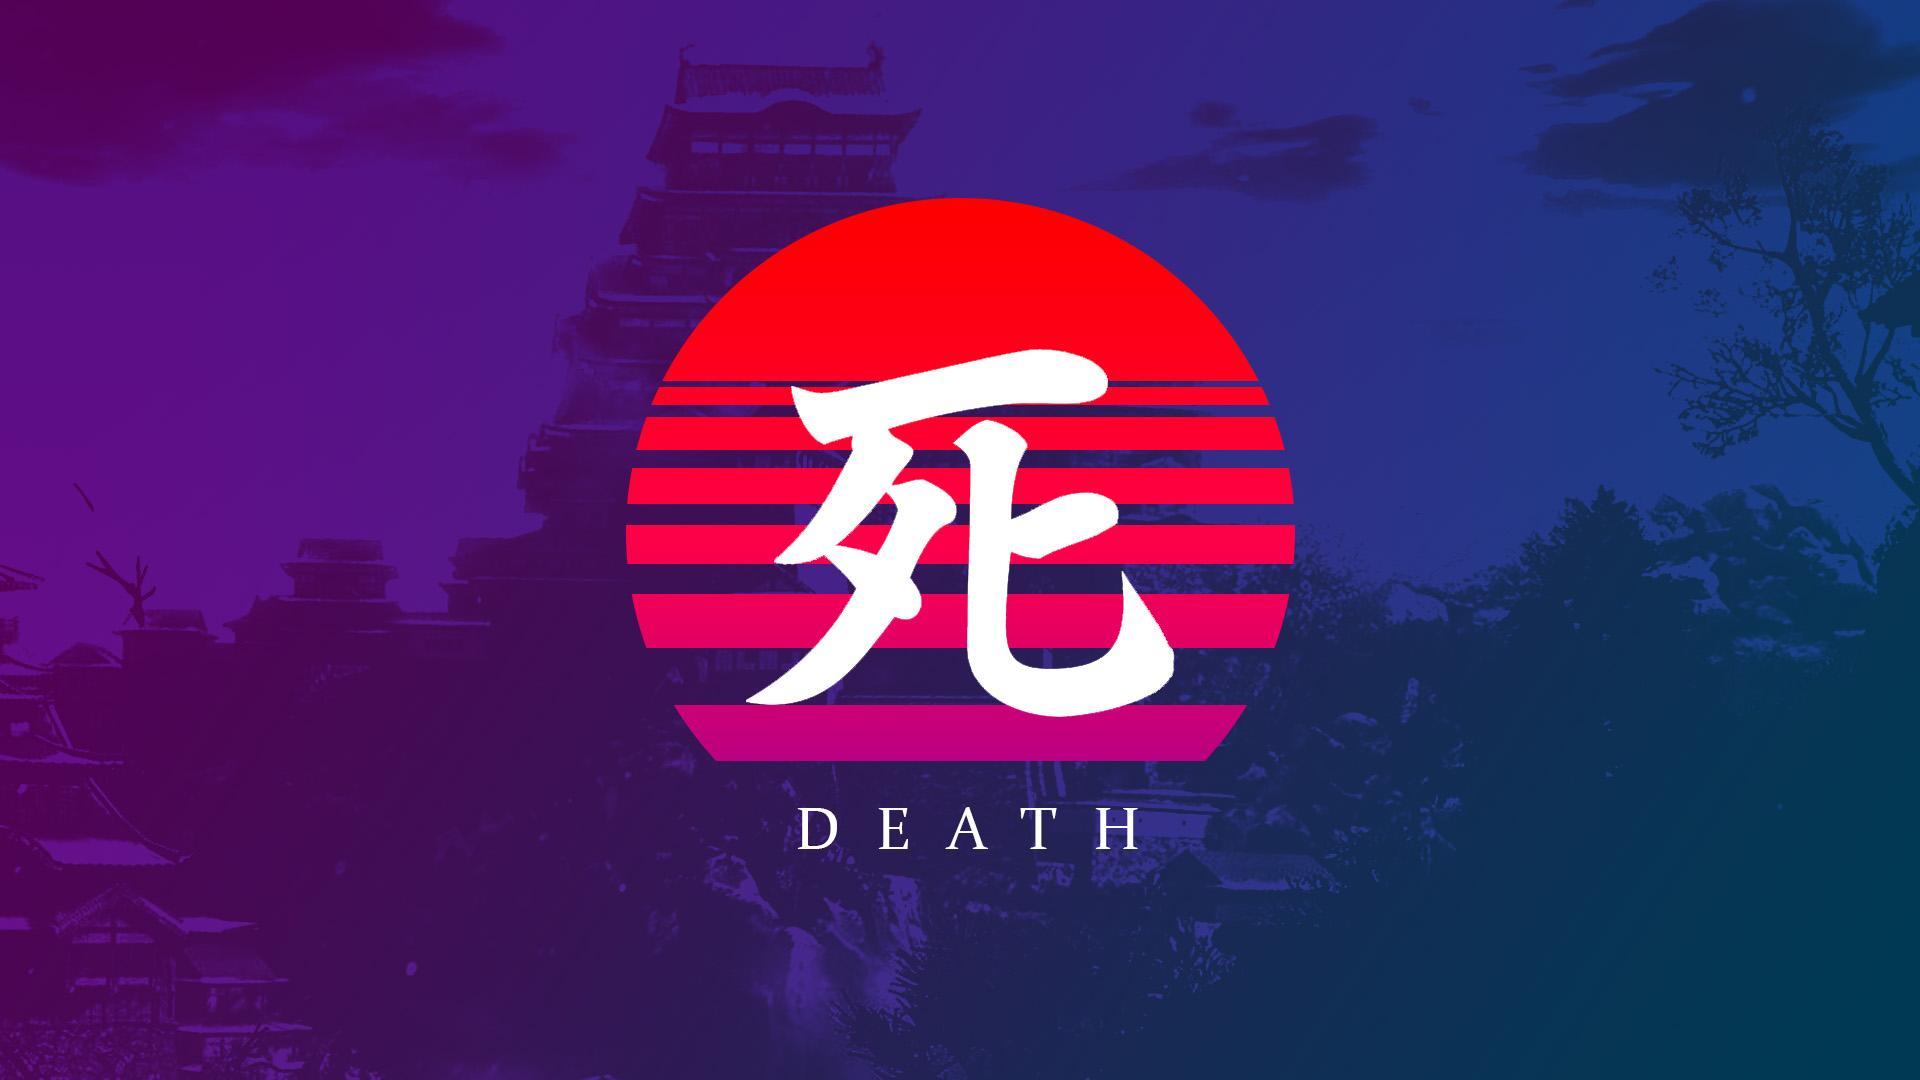 Any Sekiro fans? Whipped up a quick aesthetic wallpaper